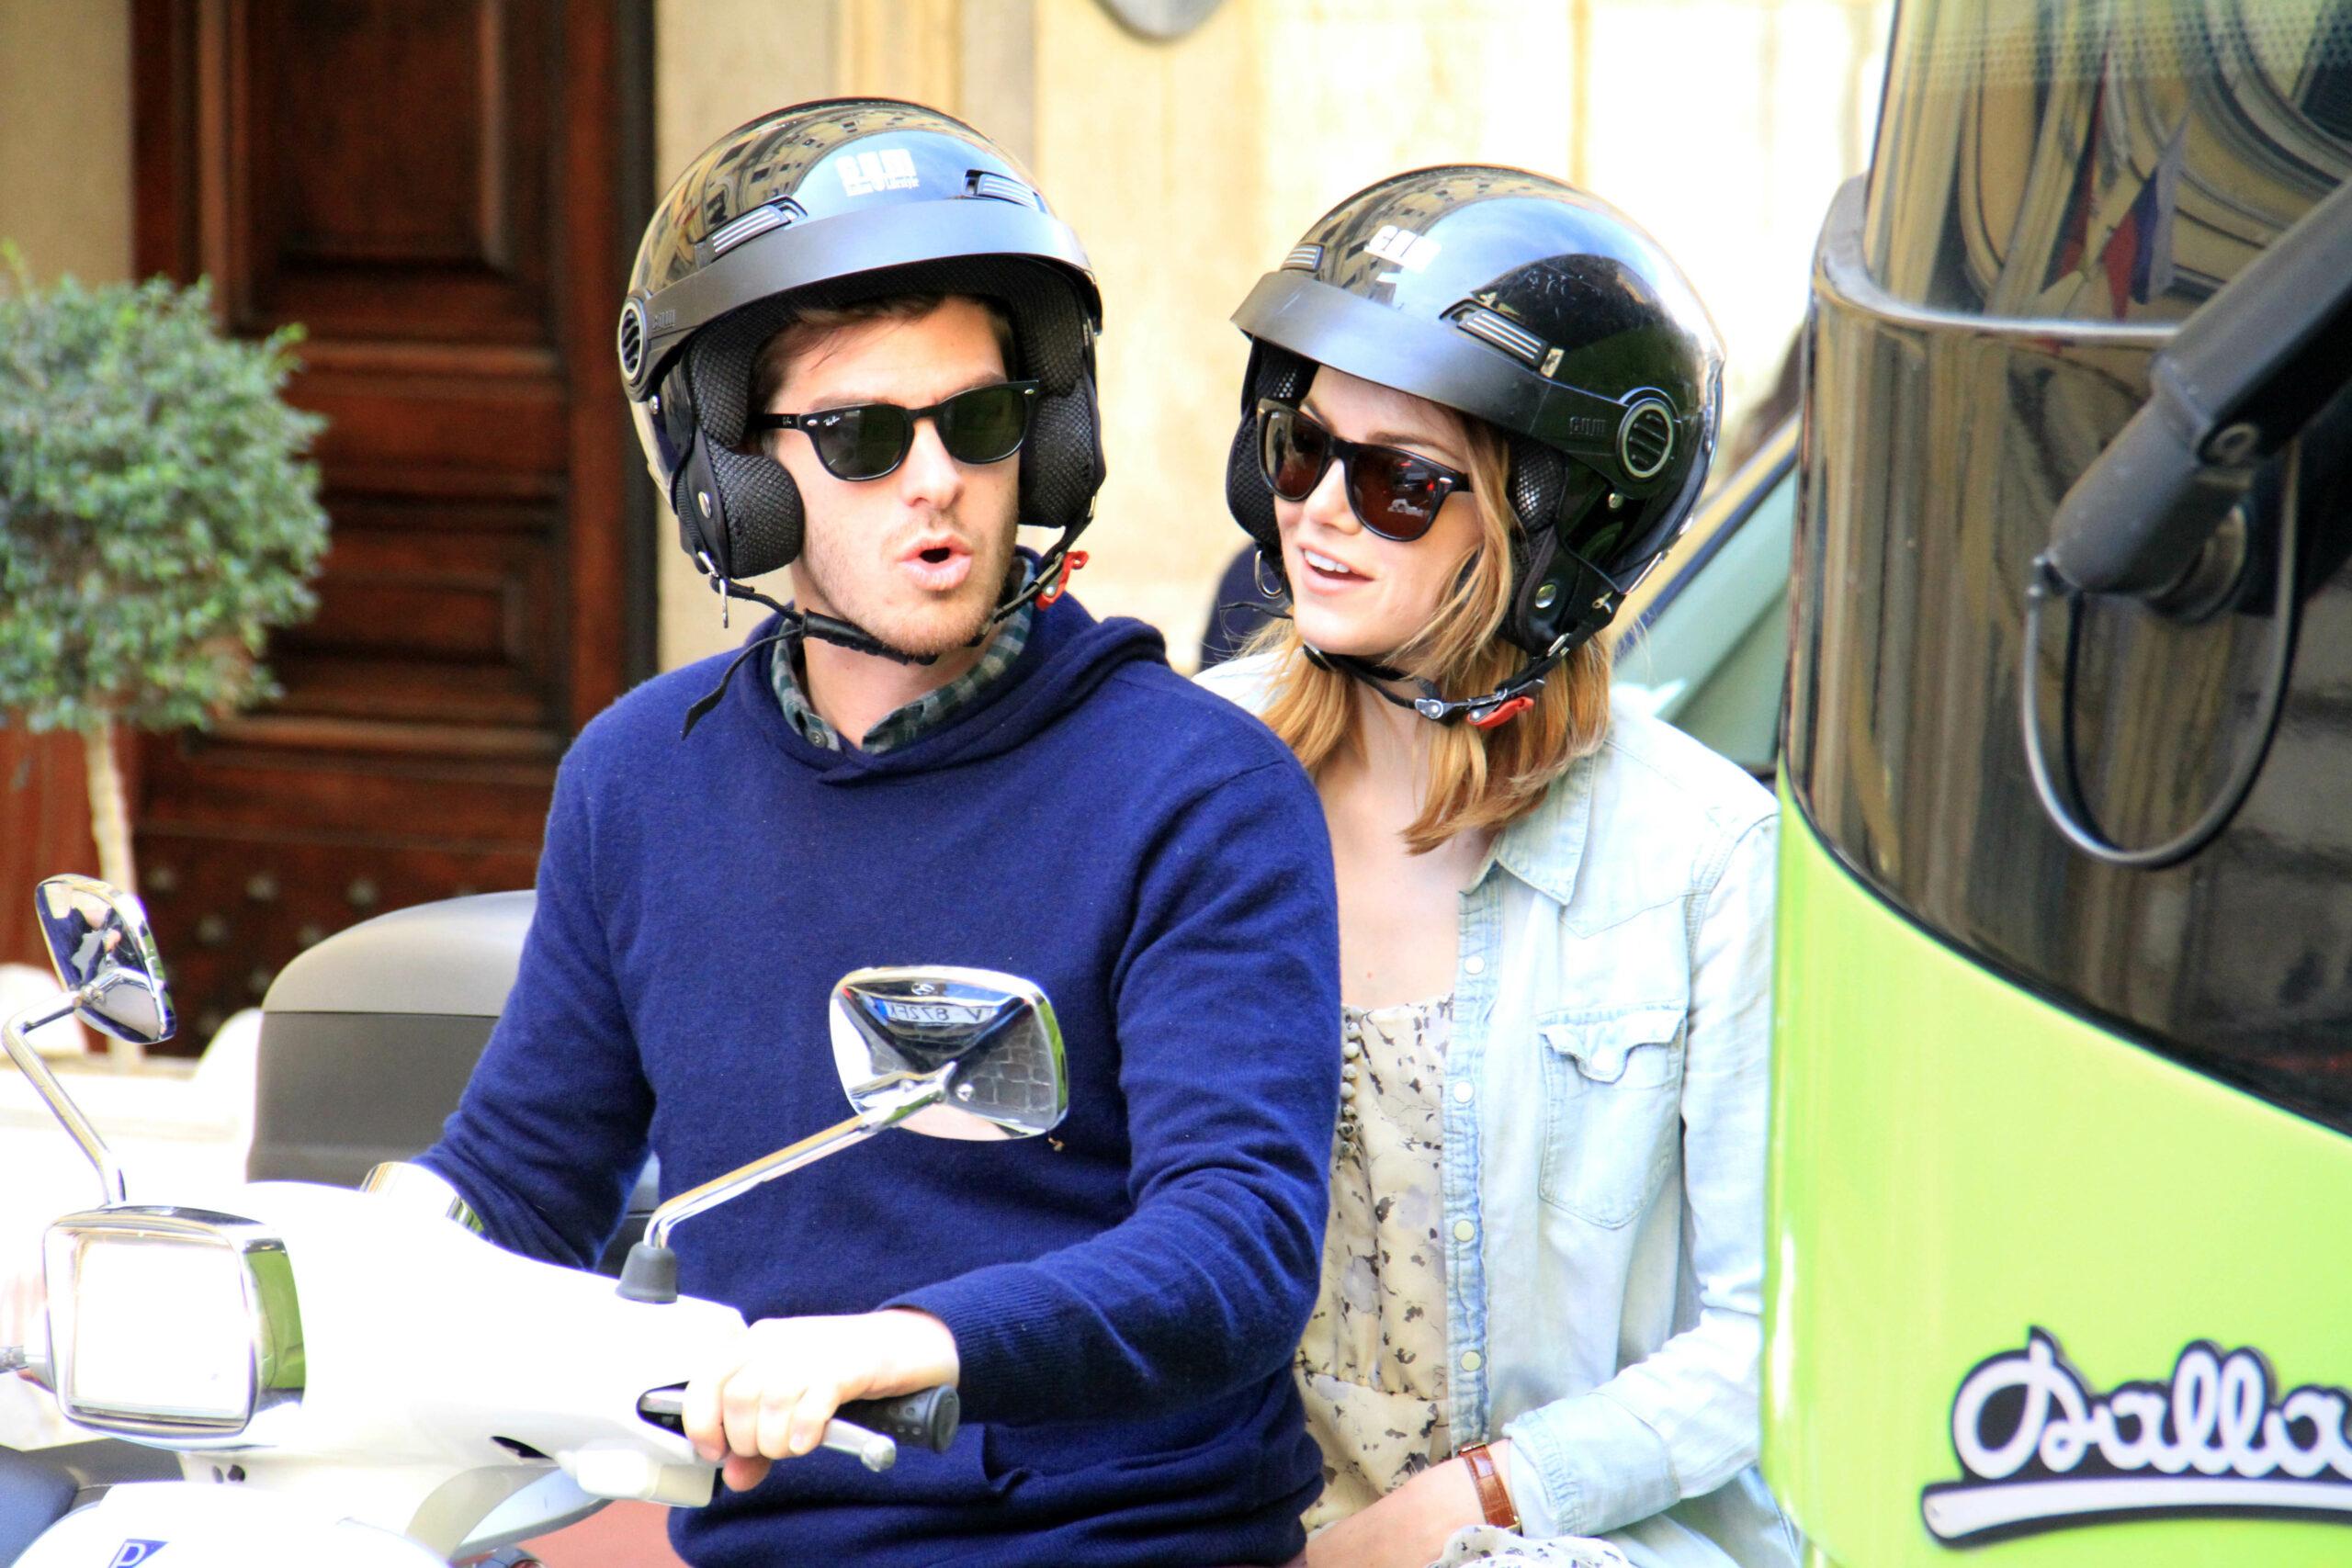 Emma Stone and her boyfriend Andrew Garfield spotted enjoying some romantic alone time on a scooter in Rome